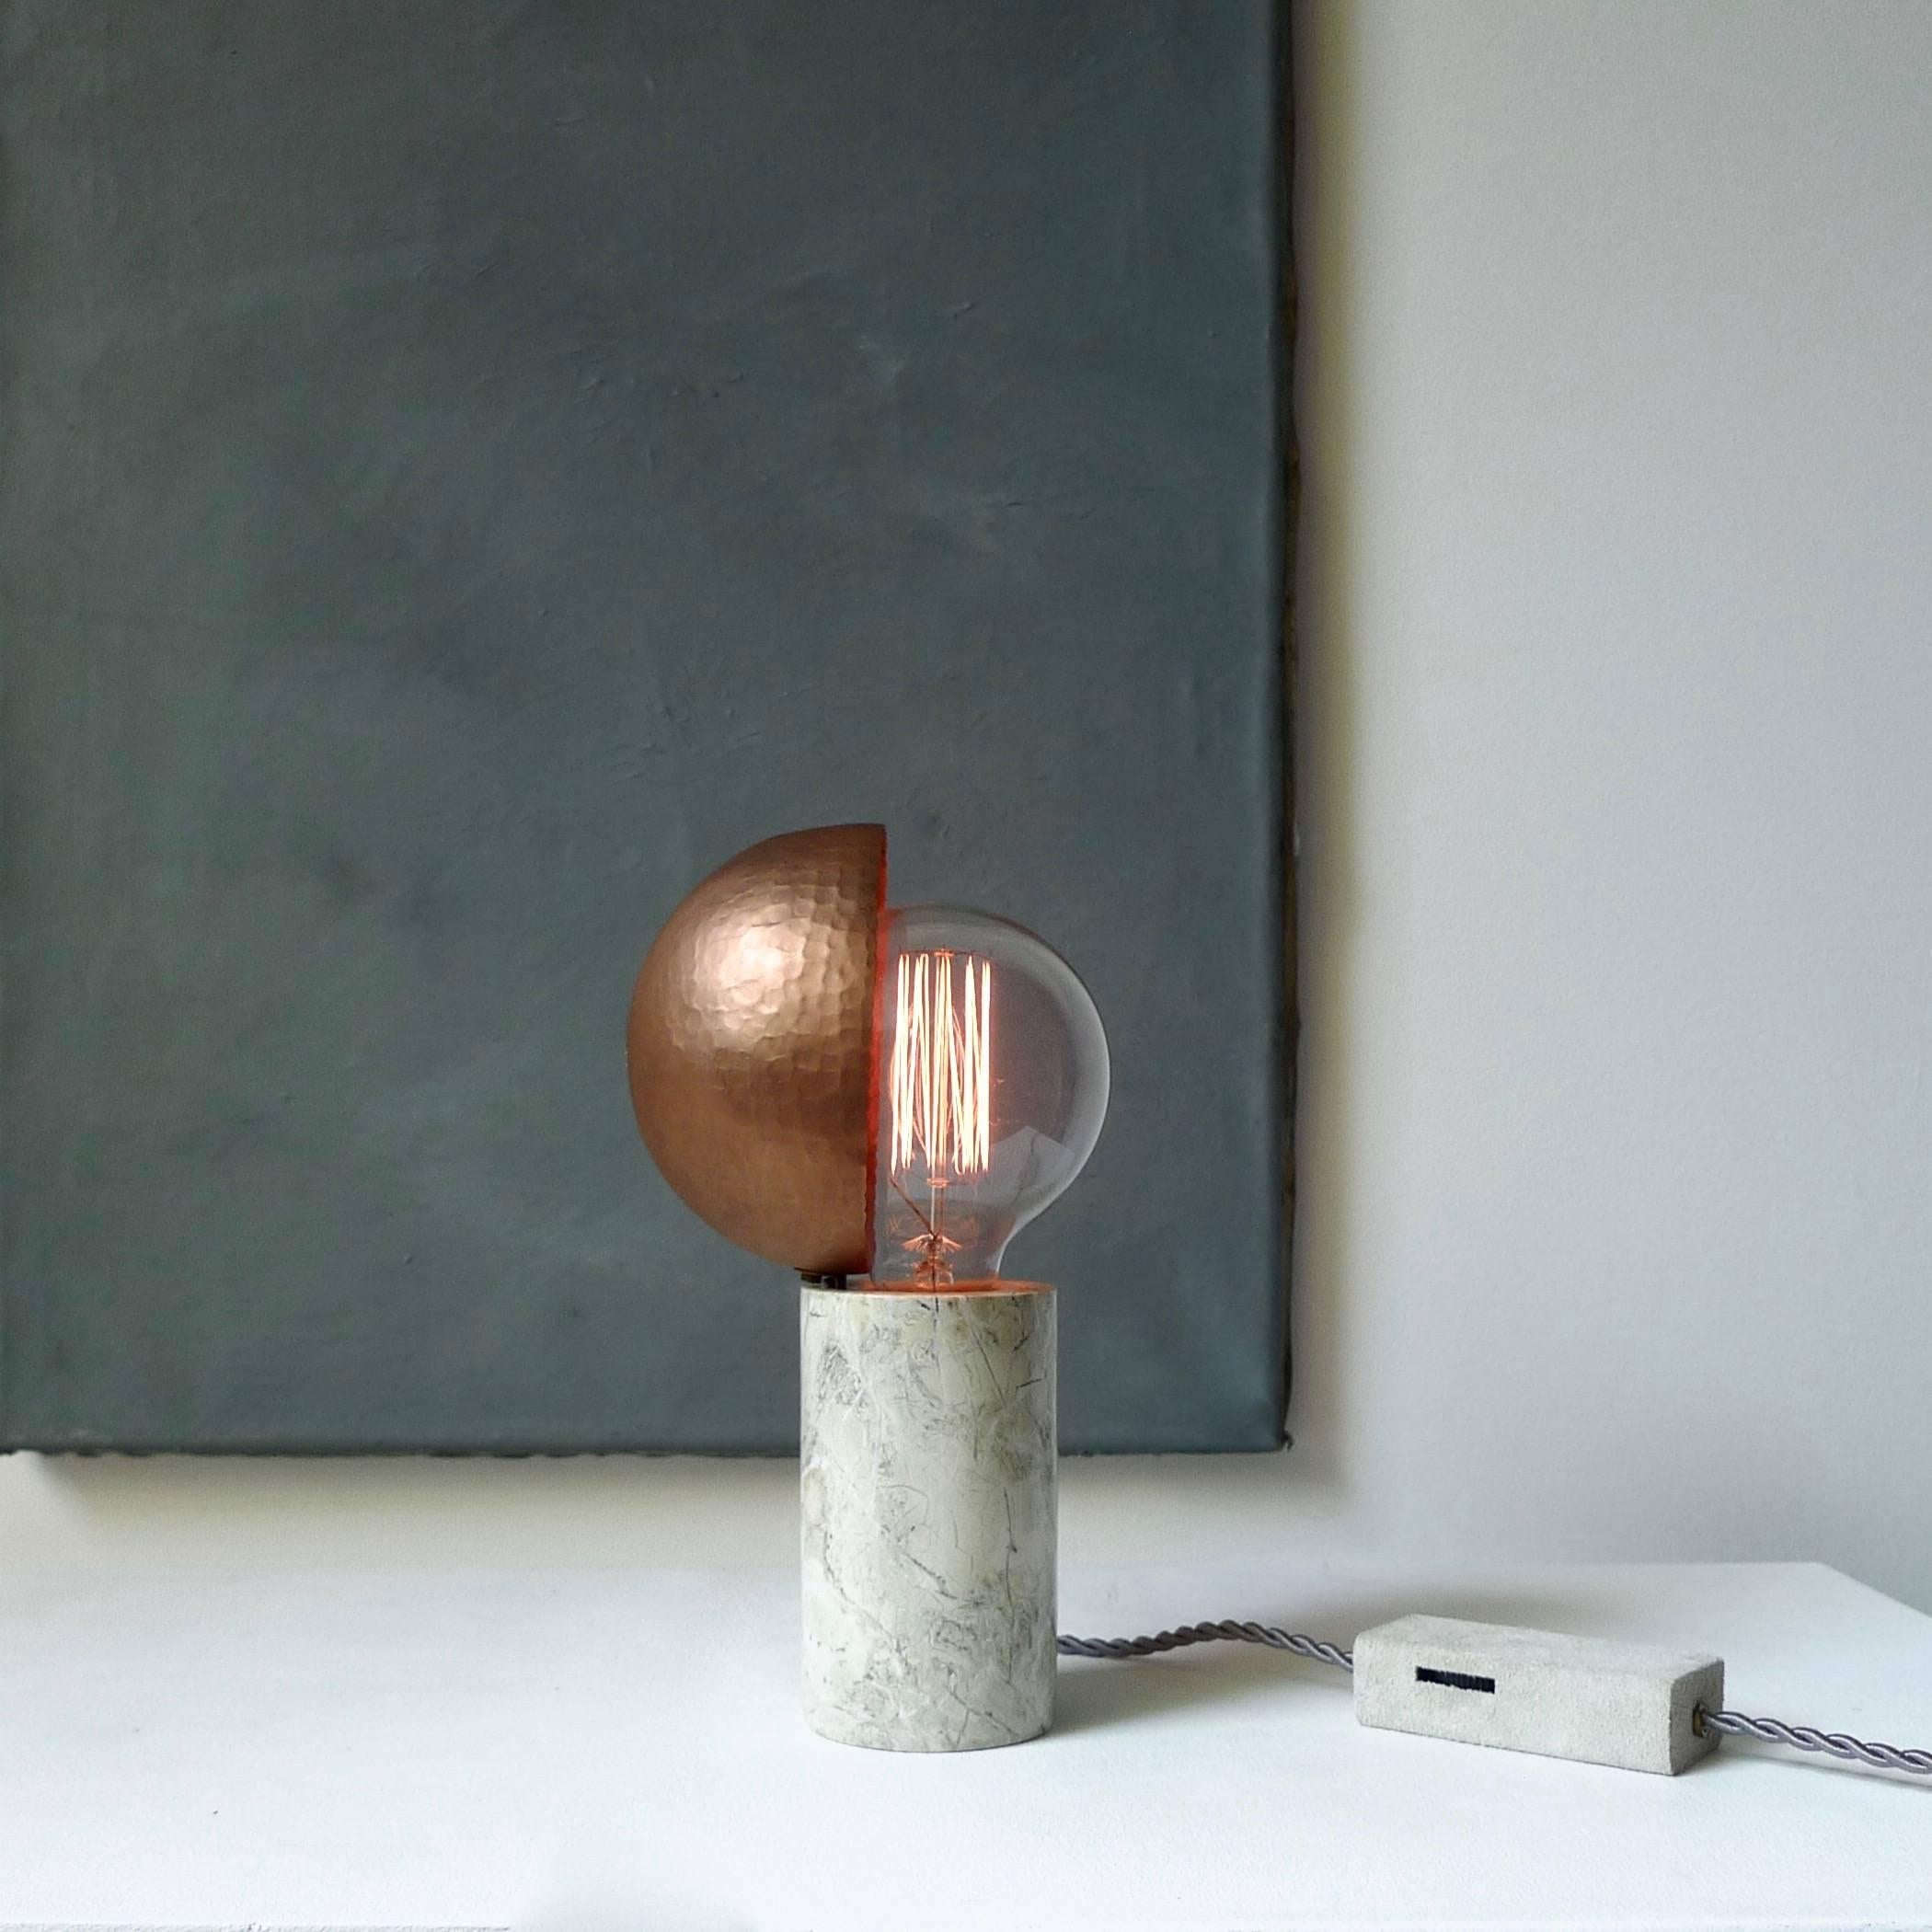 Marble table lamps, Sander Bottinga
Base in different kinds of marble
hand-hammered copper shade movable around light source.
A dimmer inlaid with leather
Dimensions: H 24 x W 12 x D 11 cm
The design artwork is meticulously handcrafted in a limited